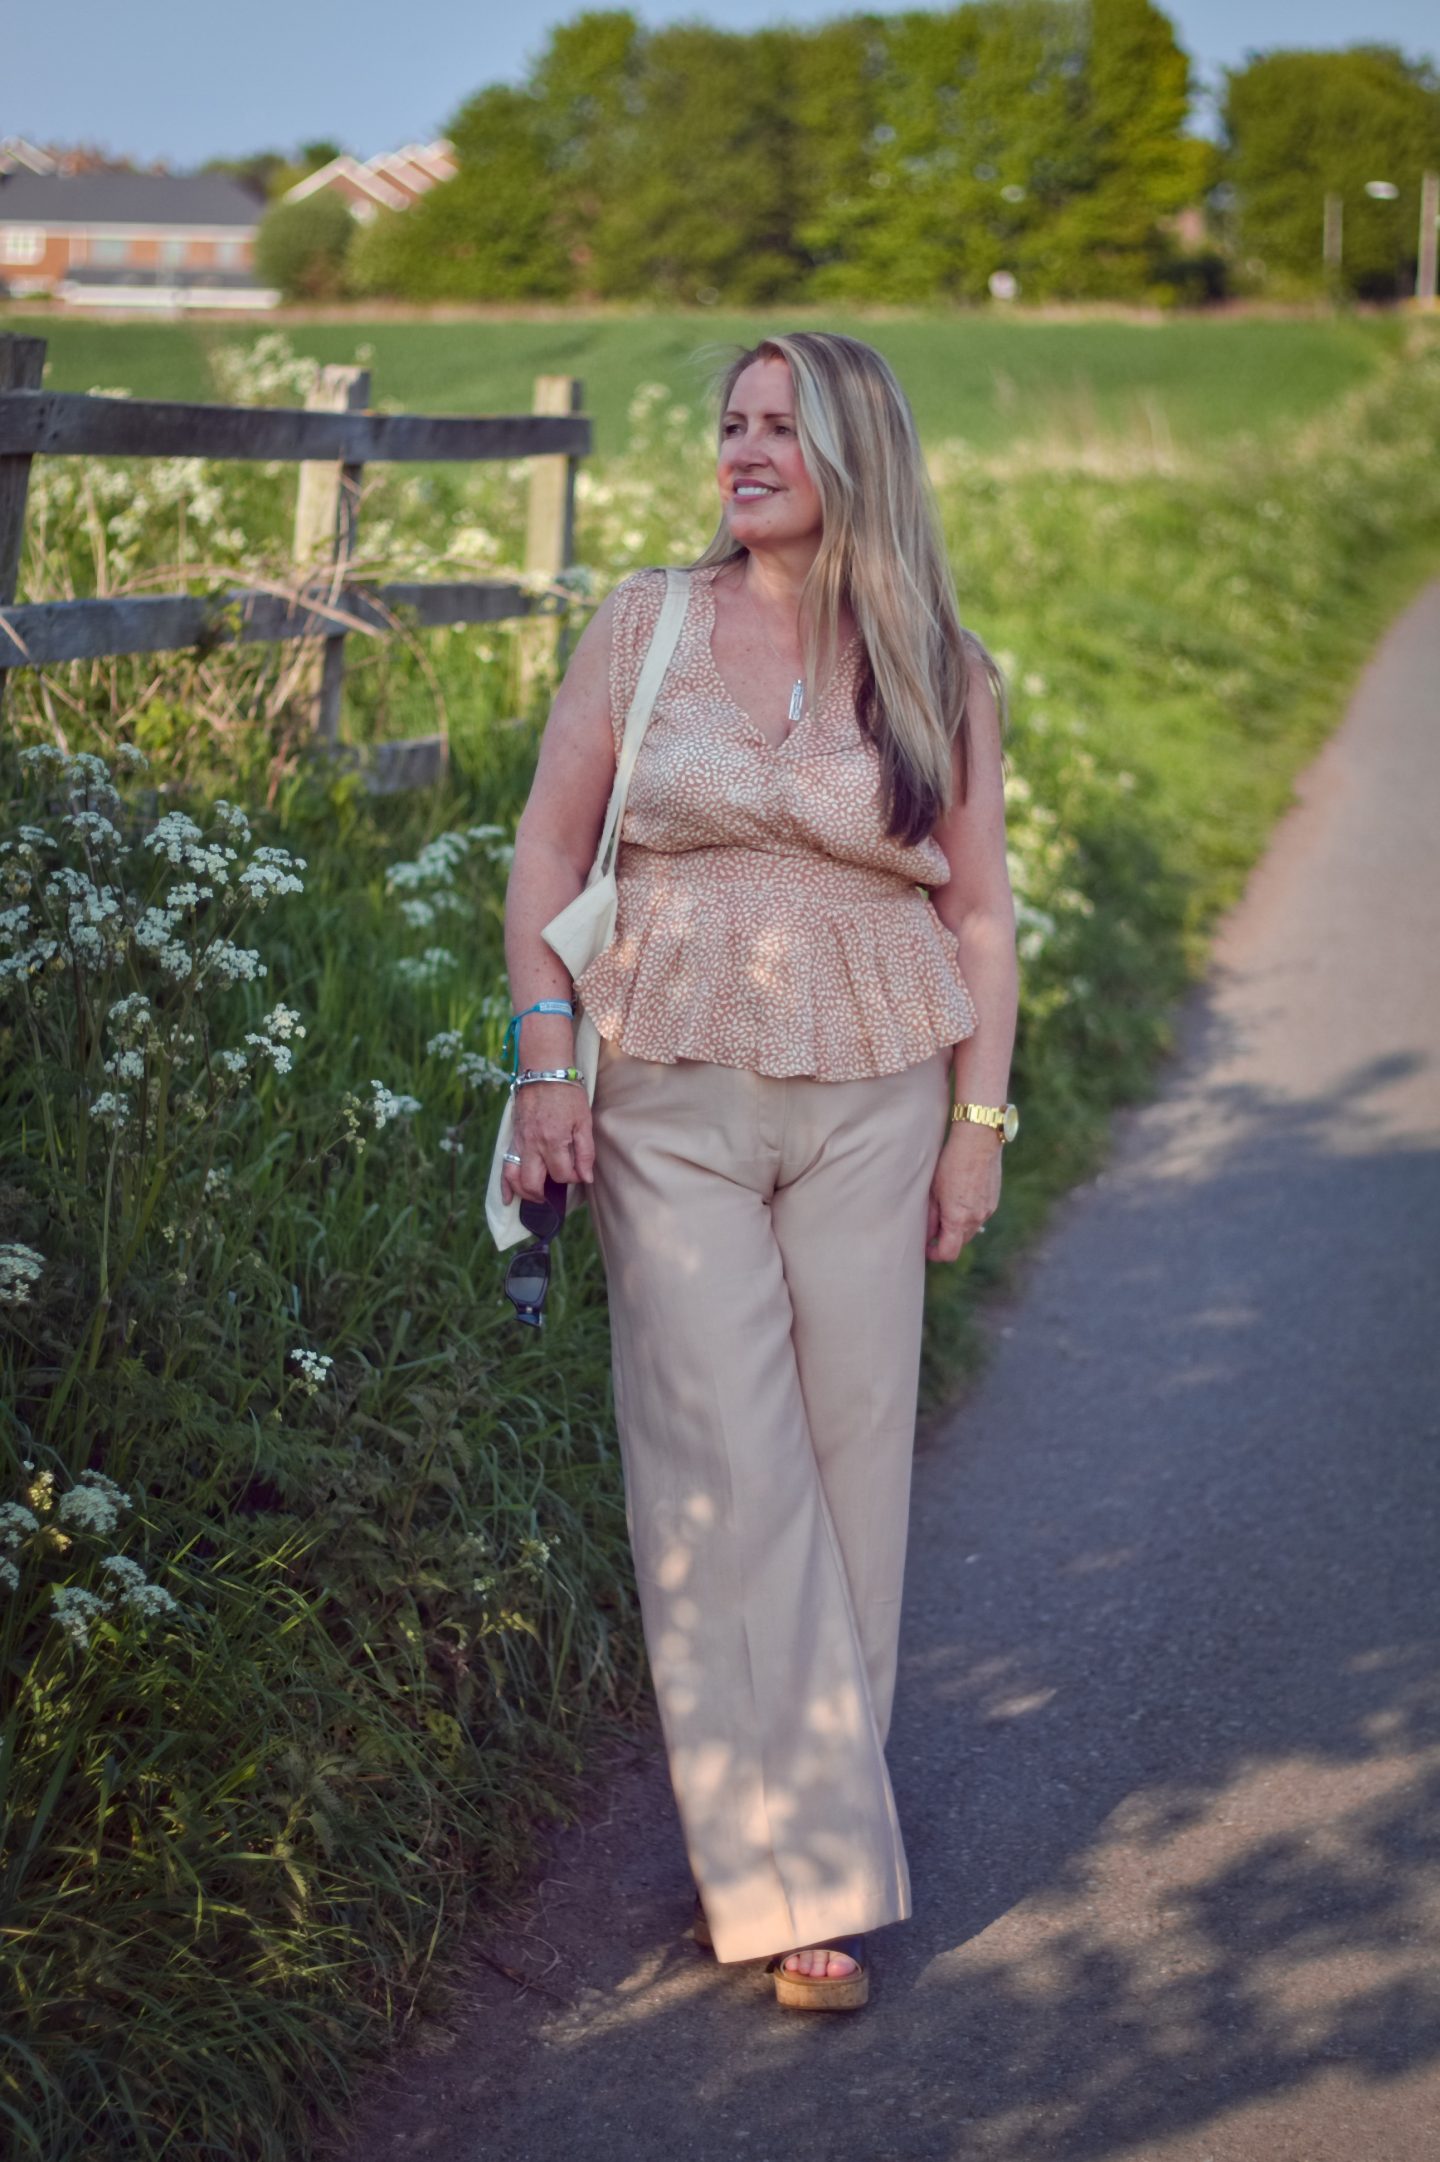 Summer Updates To My Wardrobe. - Midlife and Beyond